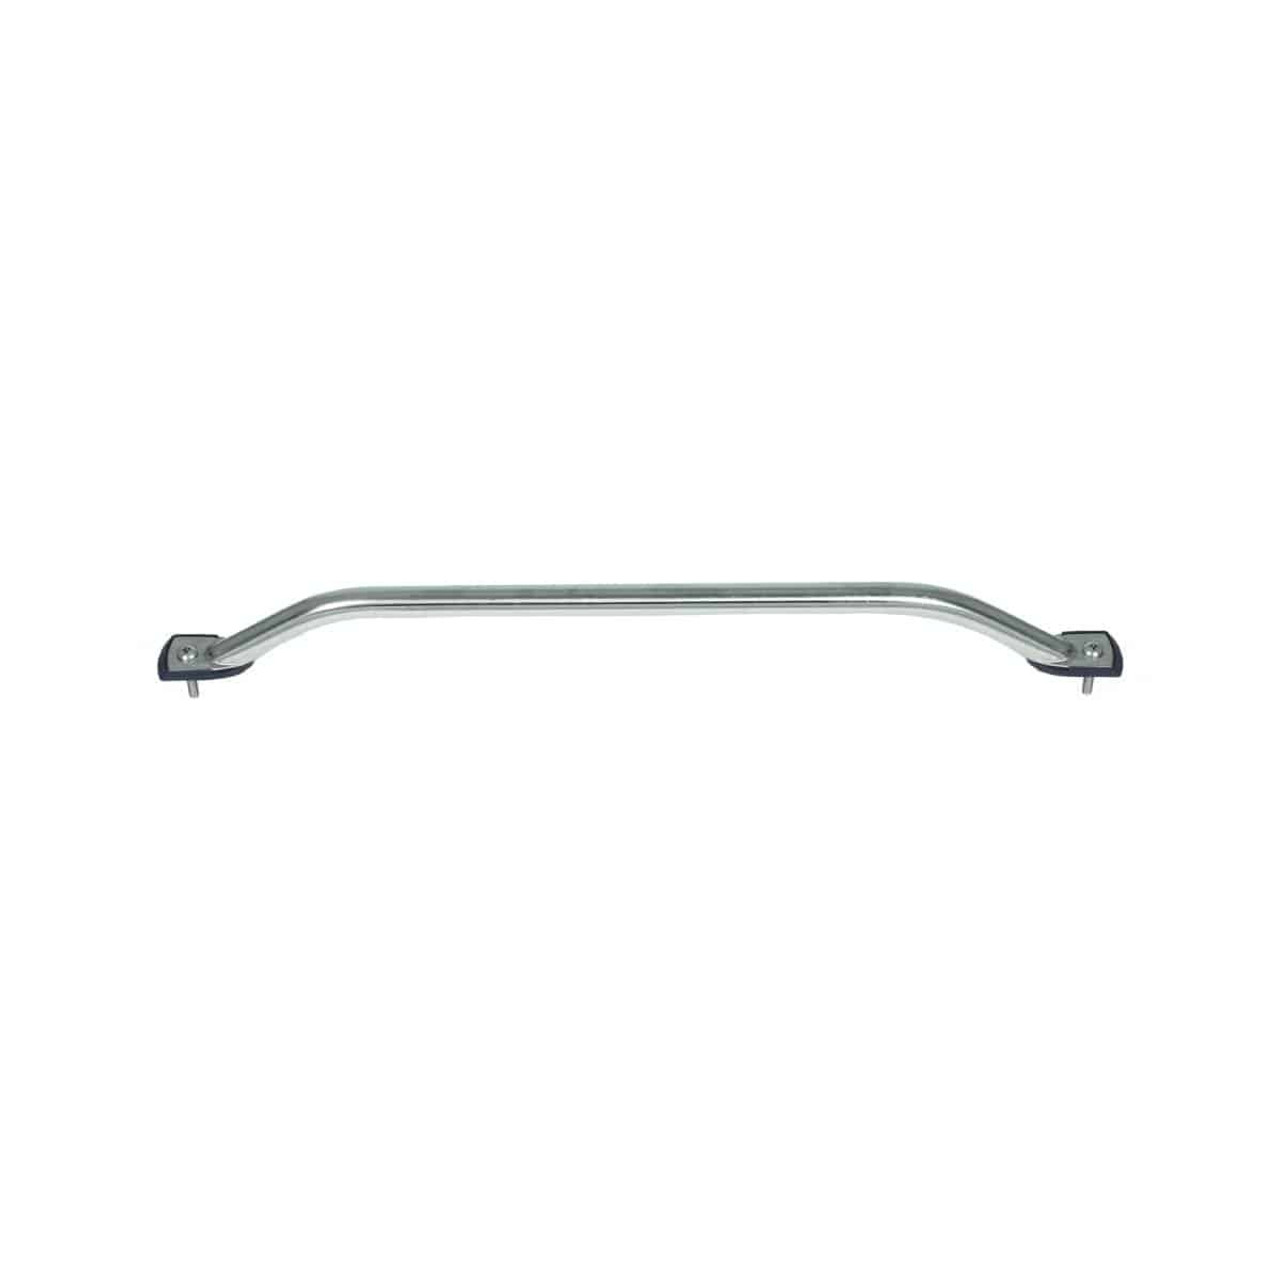 Hand Rail - Stainless Steel 457mm Long